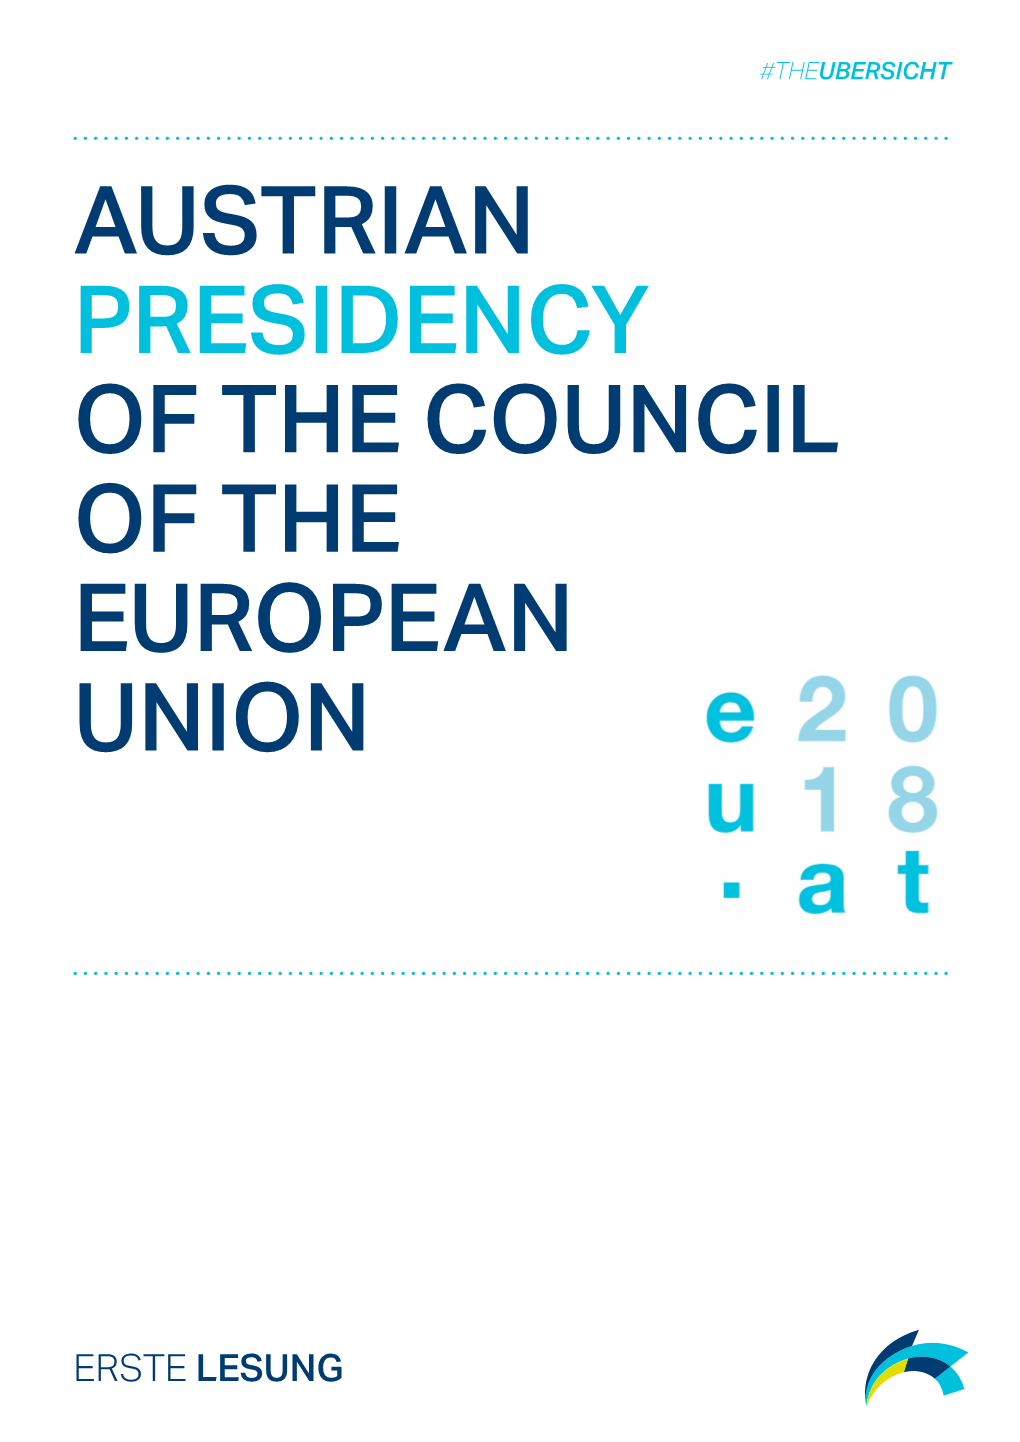 Austrian Presidency of the Council of the European Union, Erste